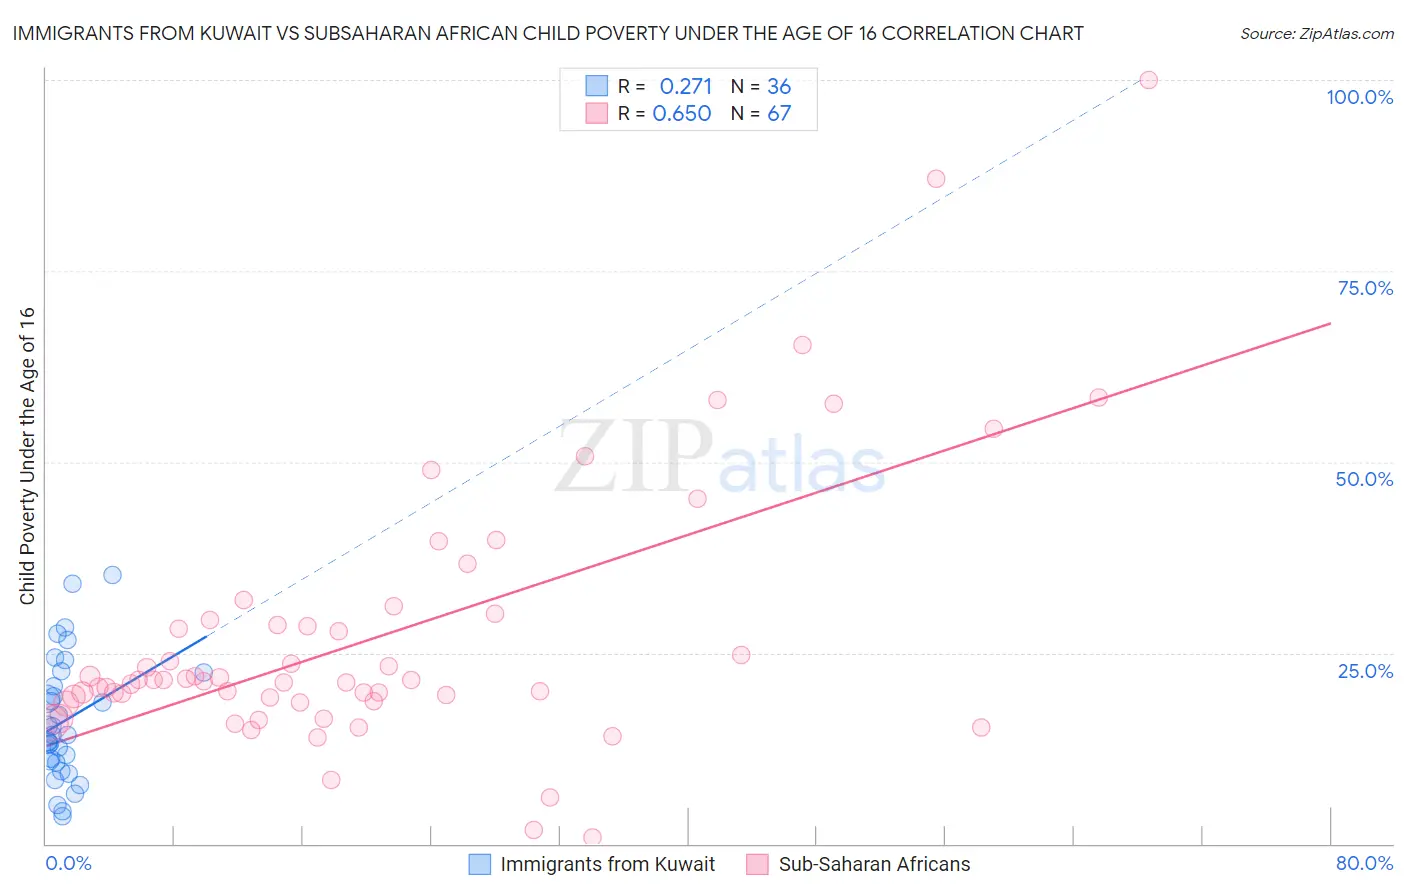 Immigrants from Kuwait vs Subsaharan African Child Poverty Under the Age of 16